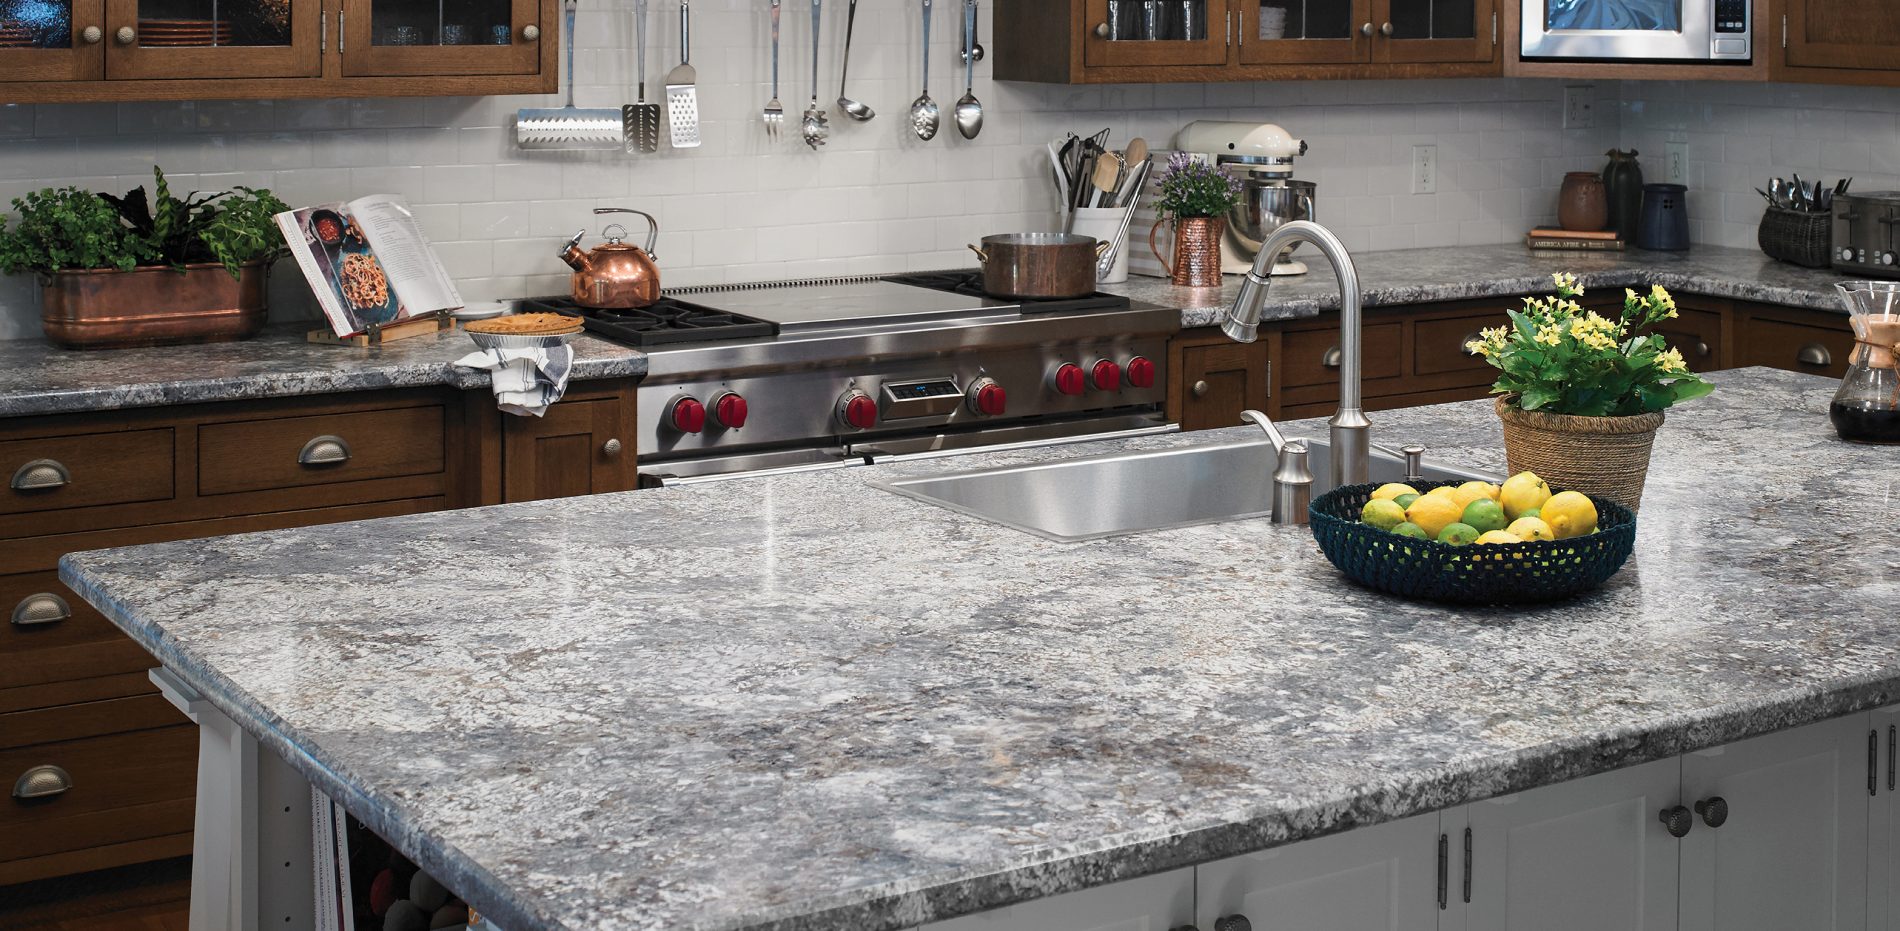 What are Formica Countertops - Contact Builders Surplus